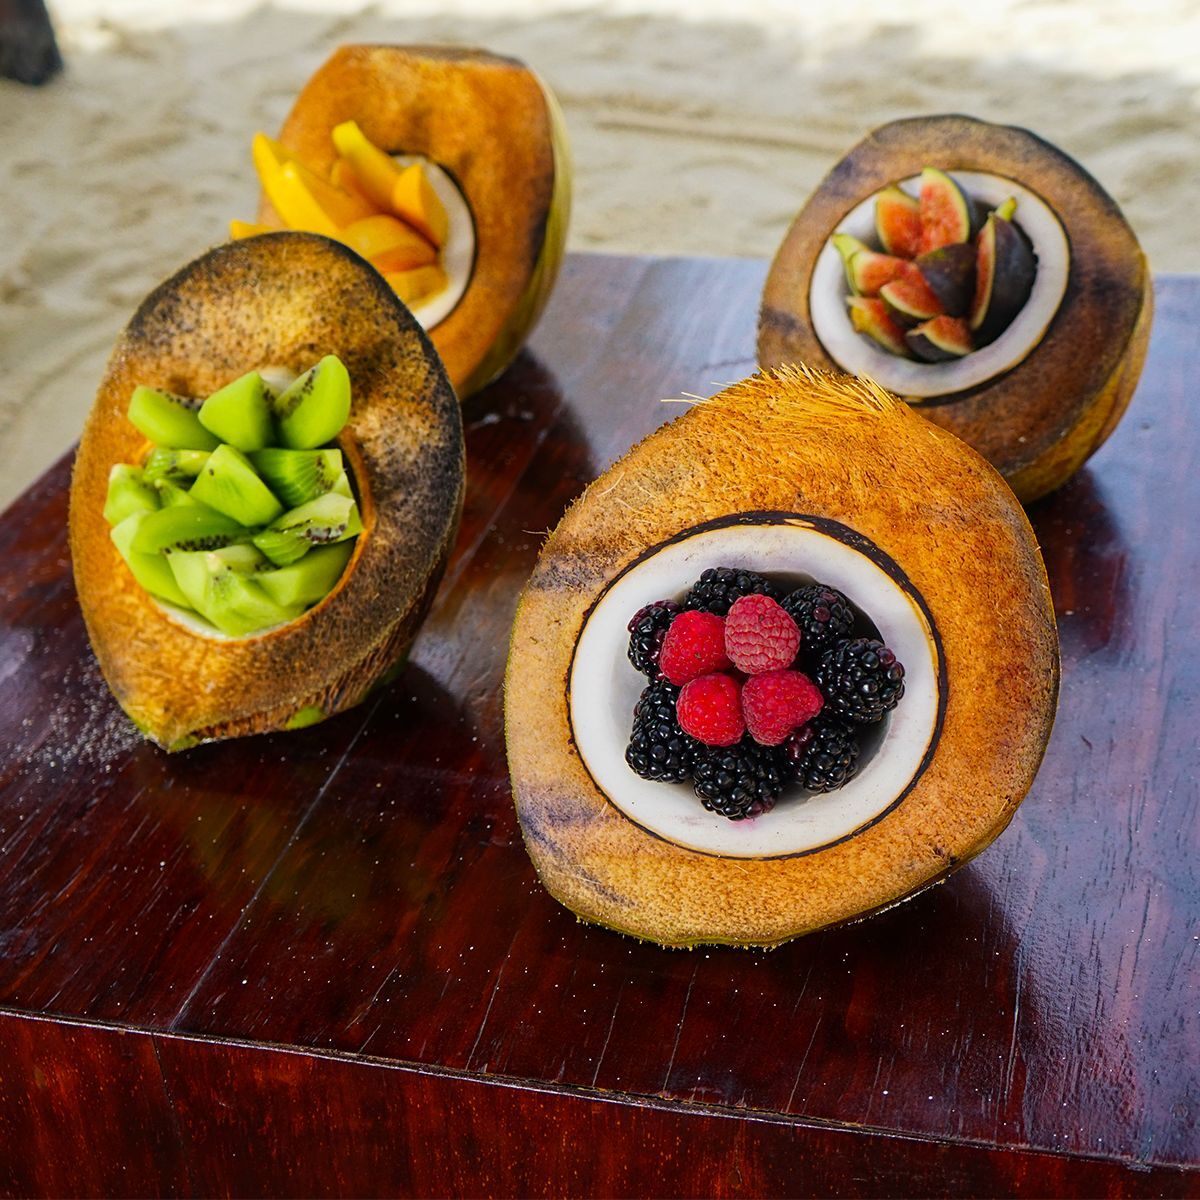 Have coconuts filled with tropical fruit for breakfast in the Riviera Maya.